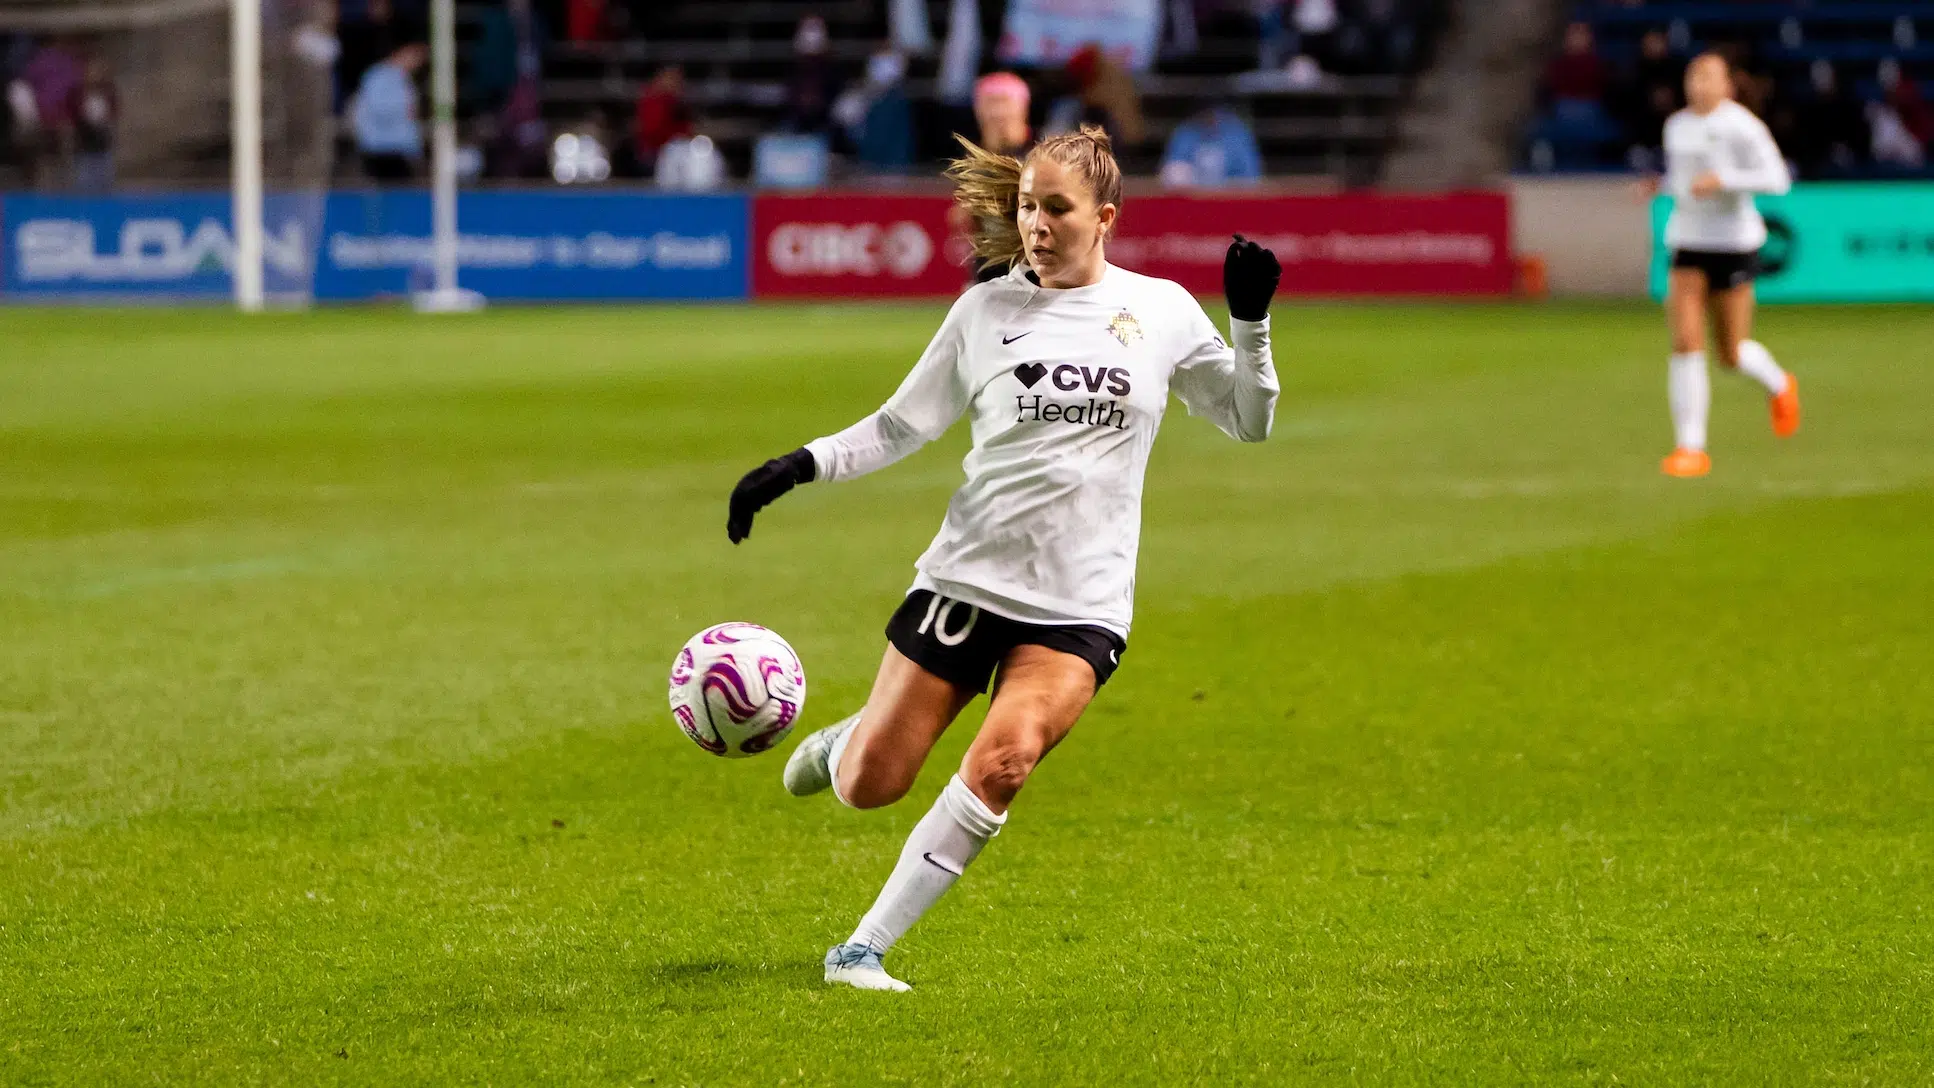 Kitted in a white Spirit jersey, black shorts, white socks and black gloves, Ashley Sanchez prepares to trap a soccer ball.